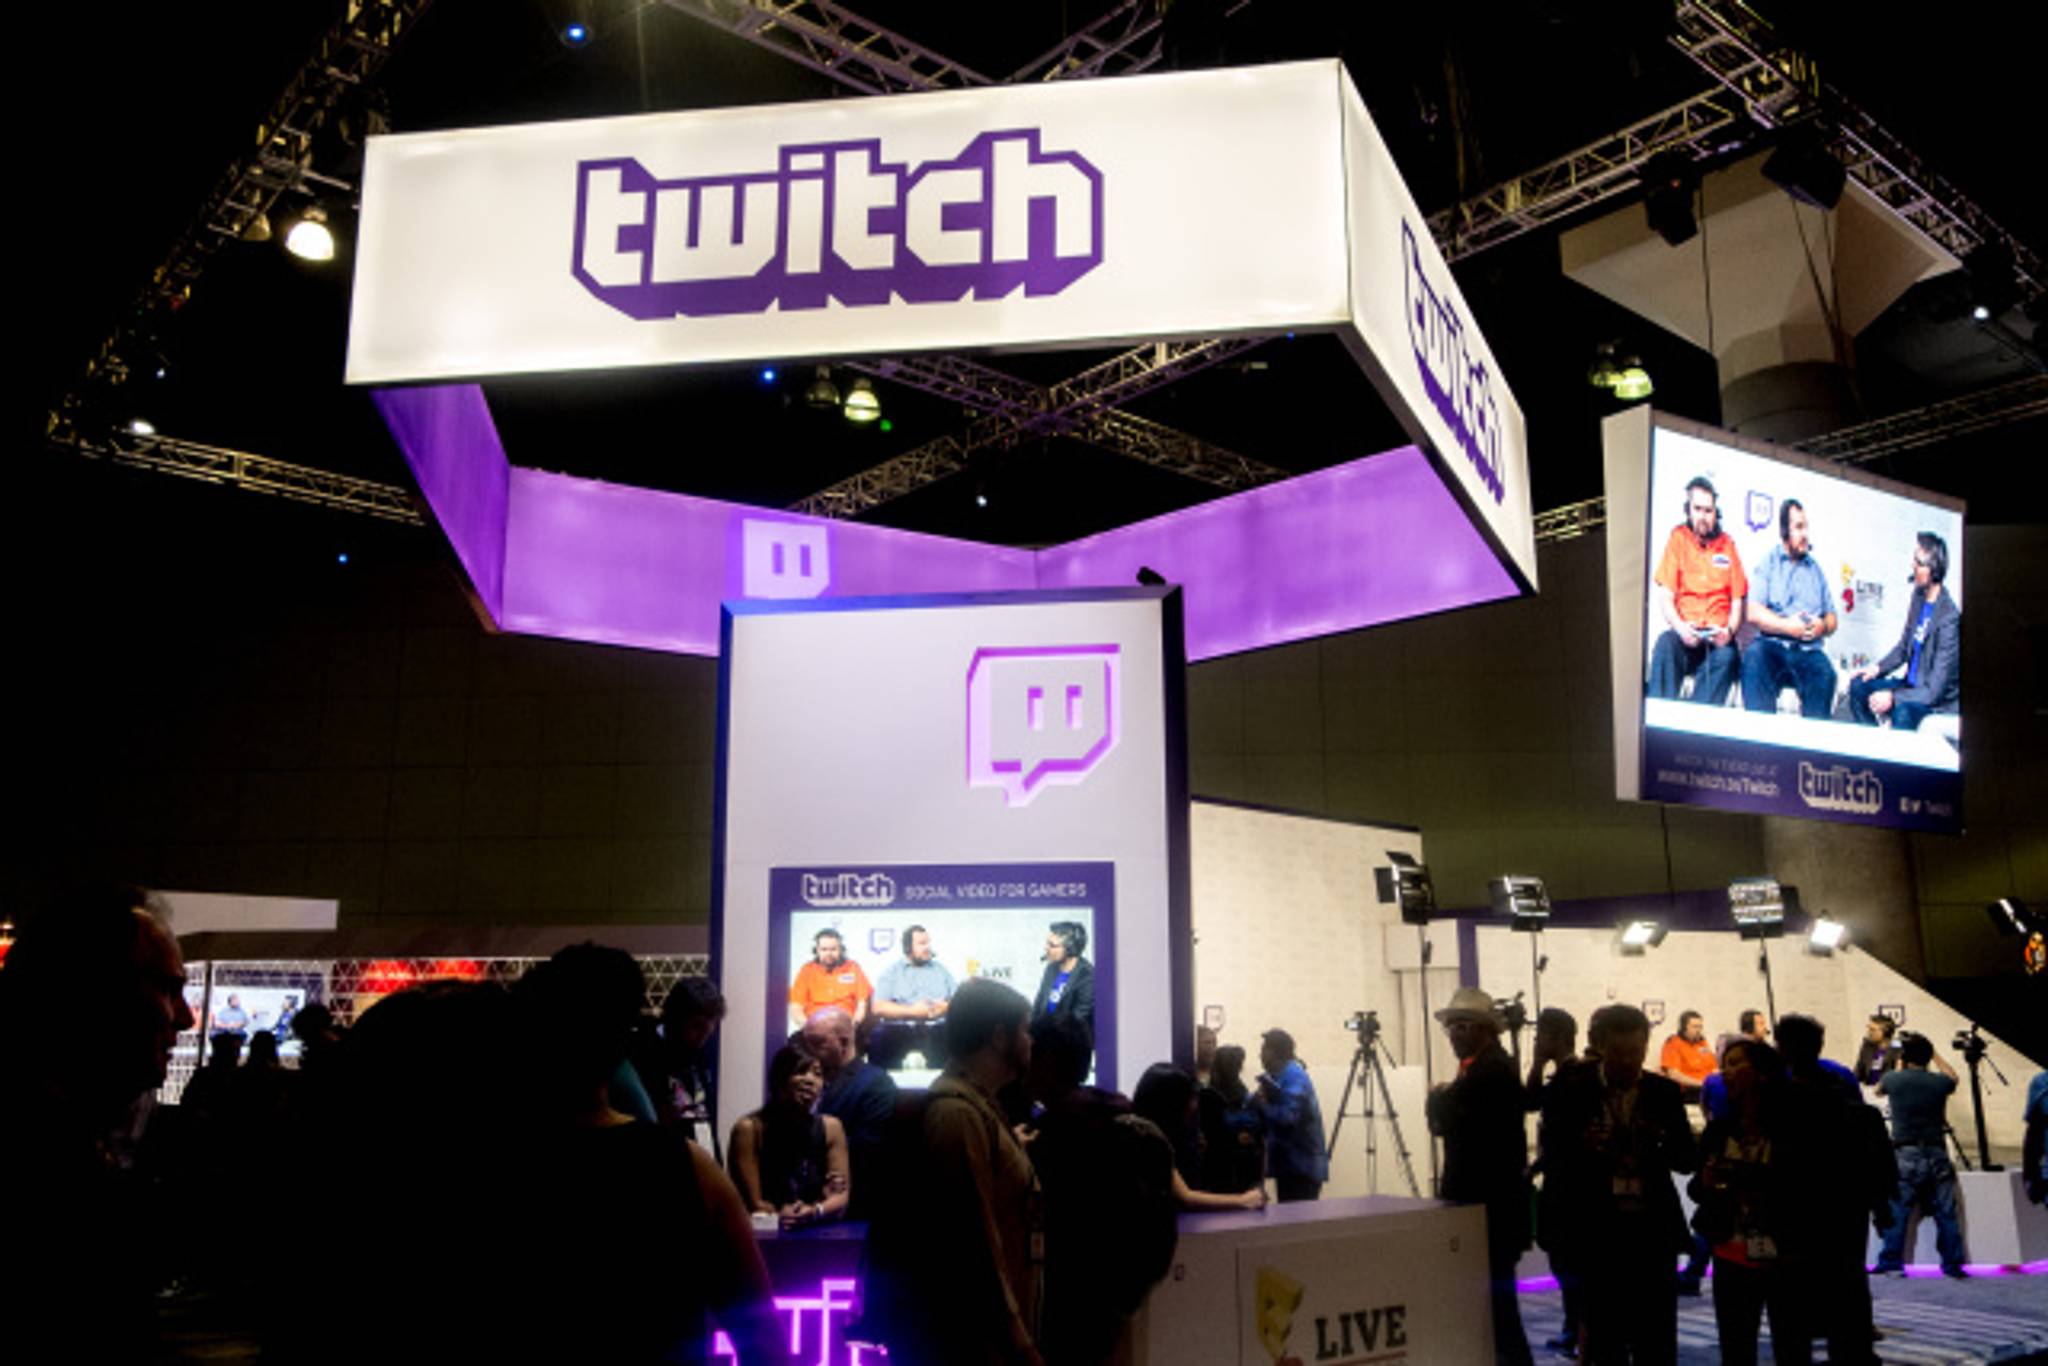 Twitch levels up safety against abuse for streamers